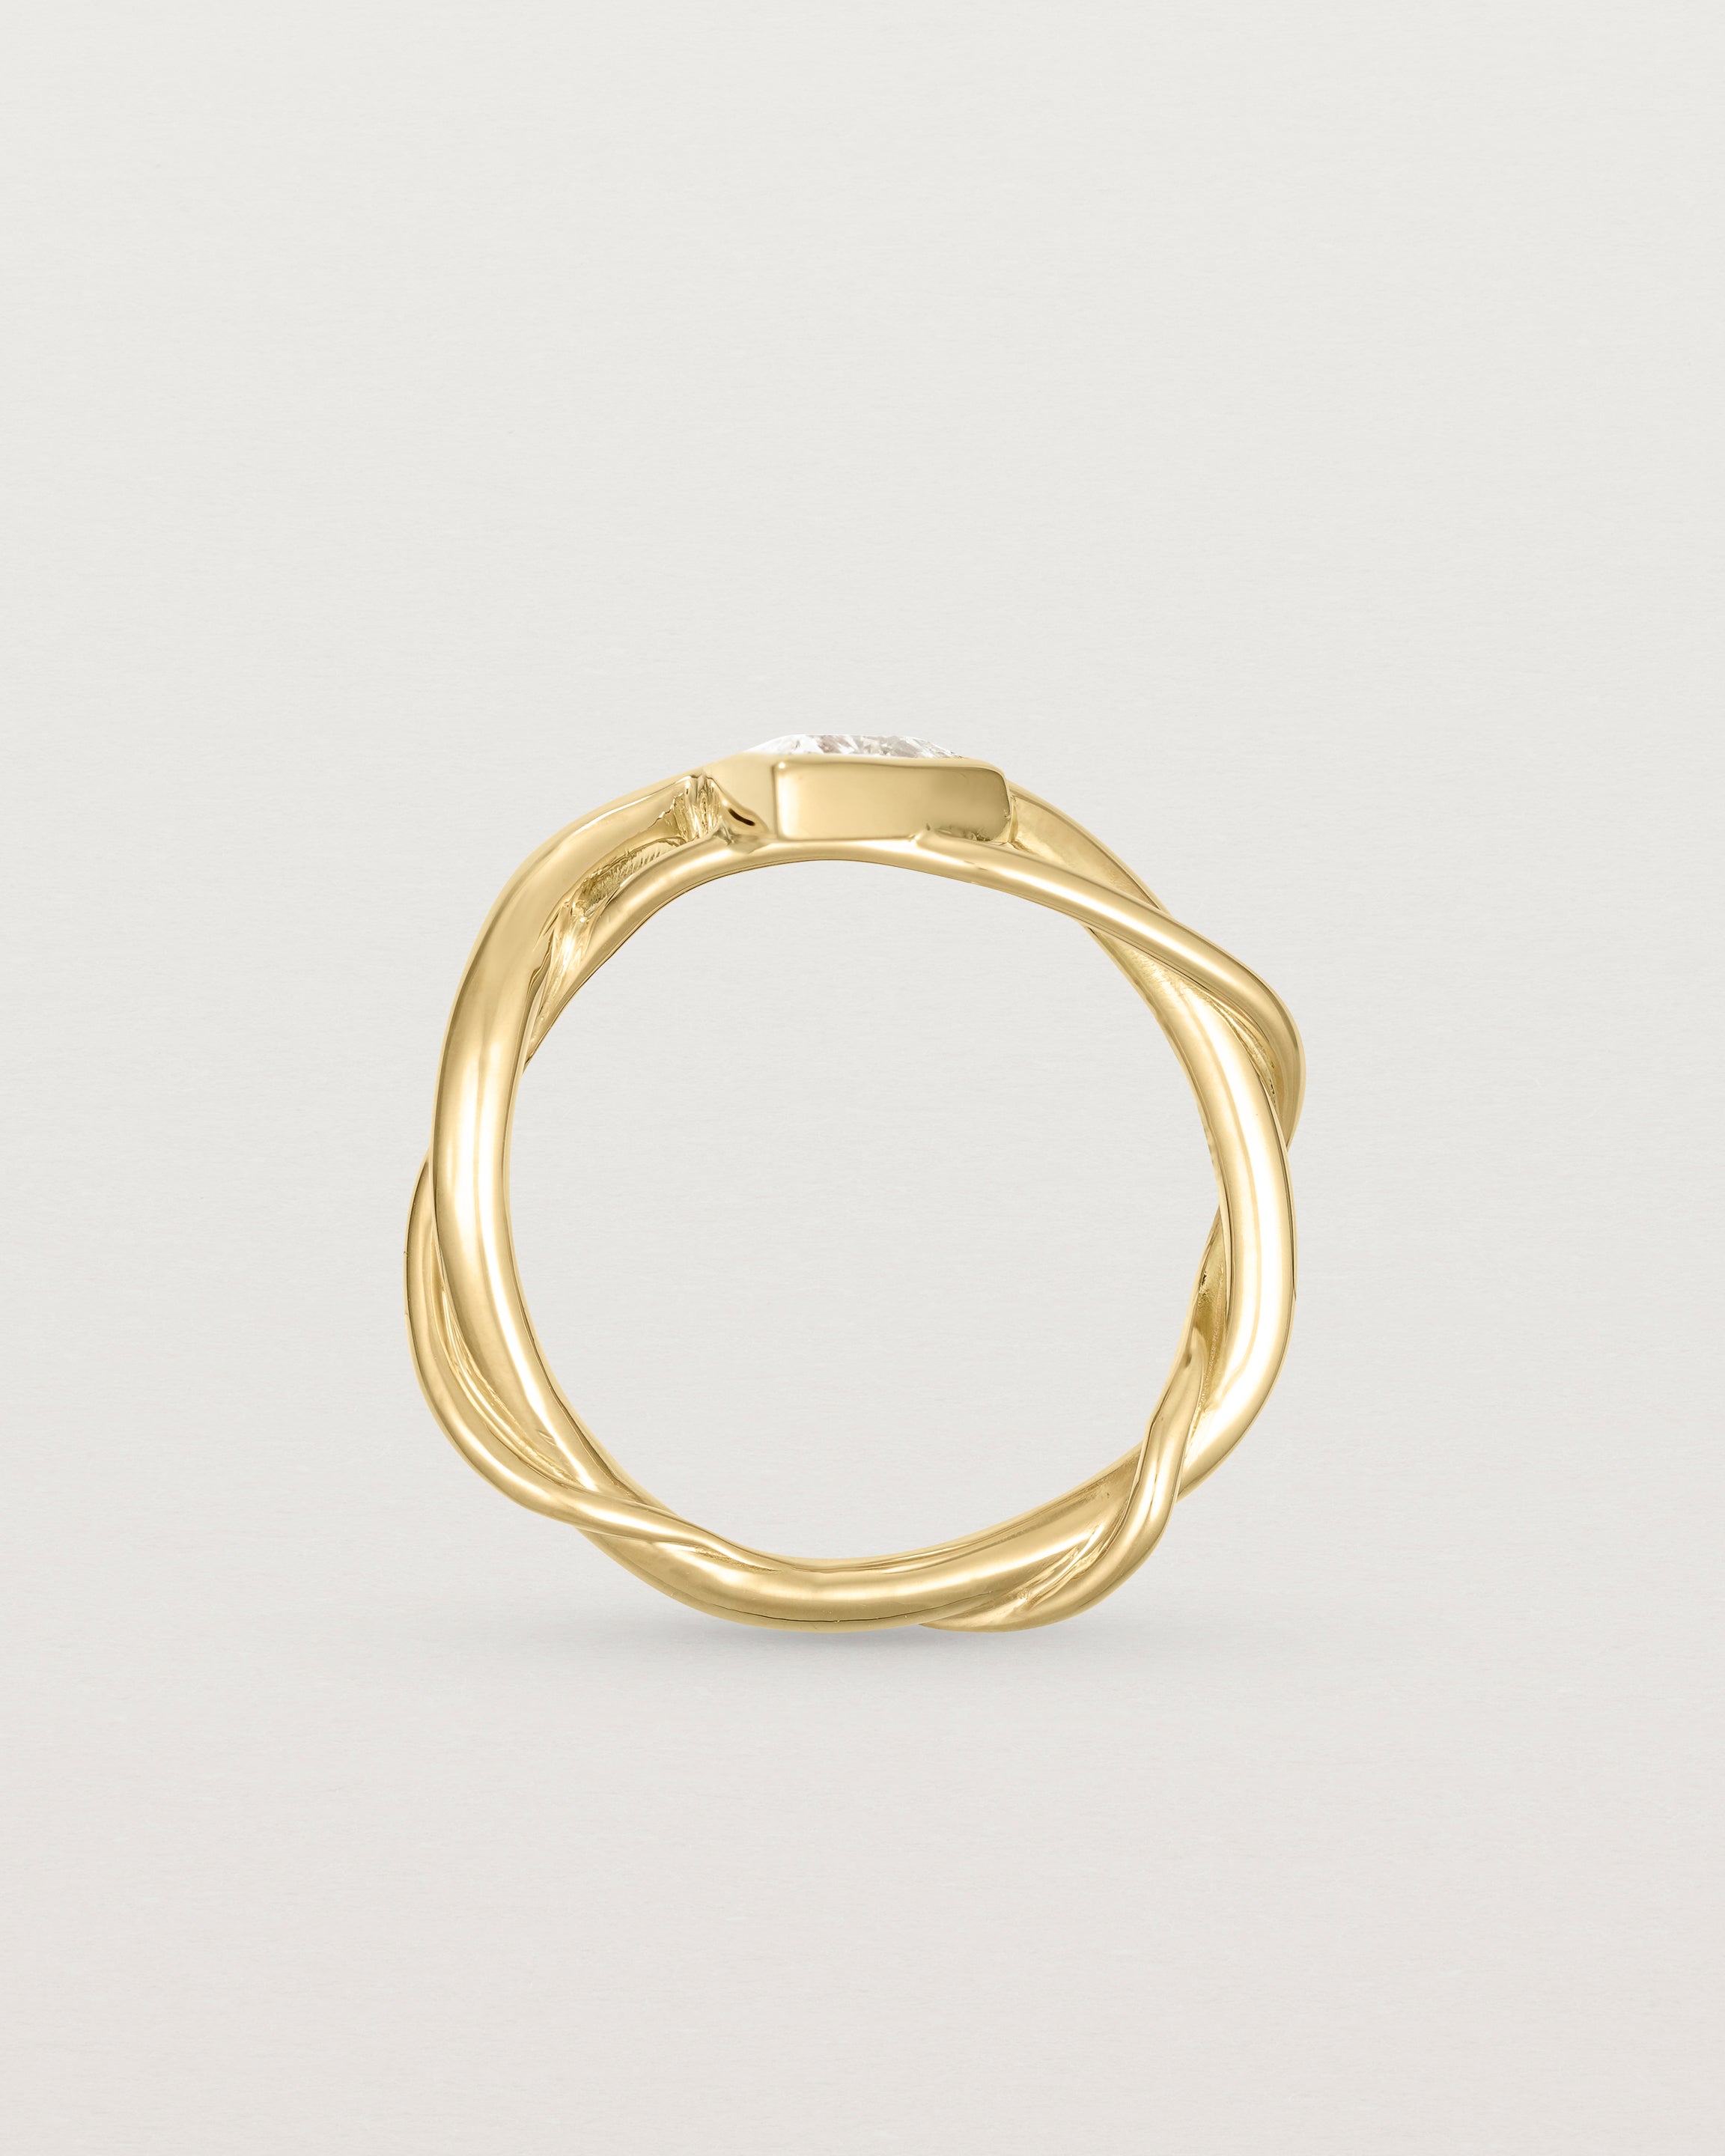 Standing view of the Calla Ring | Diamond.